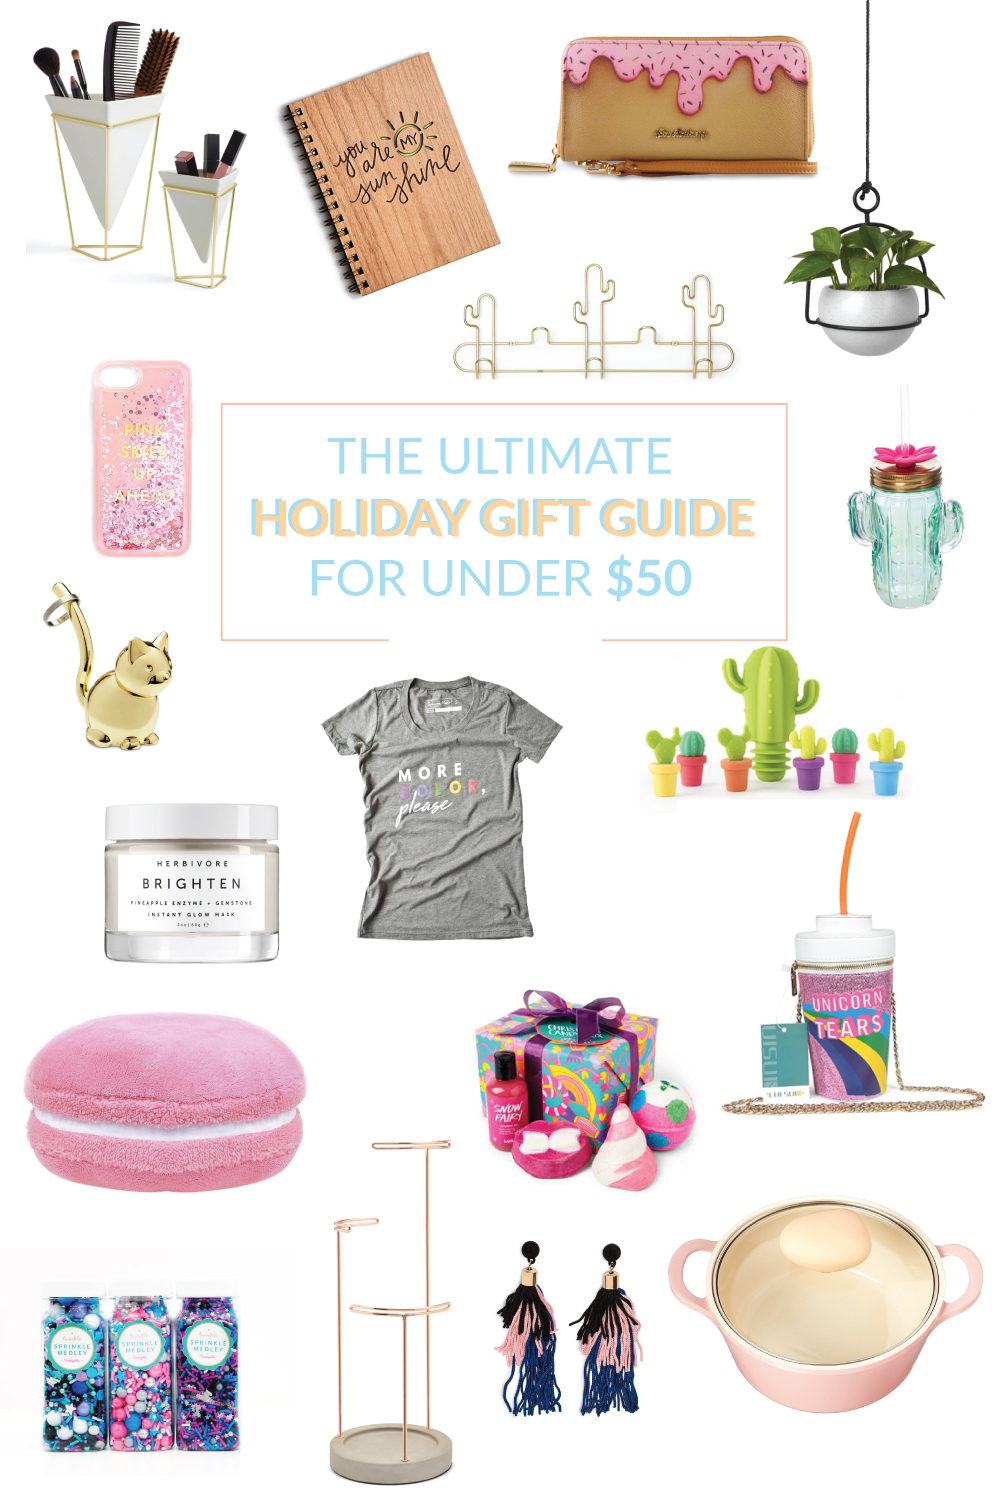 My 2017 Holiday Gift Guide for Under $50 | Club Crafted